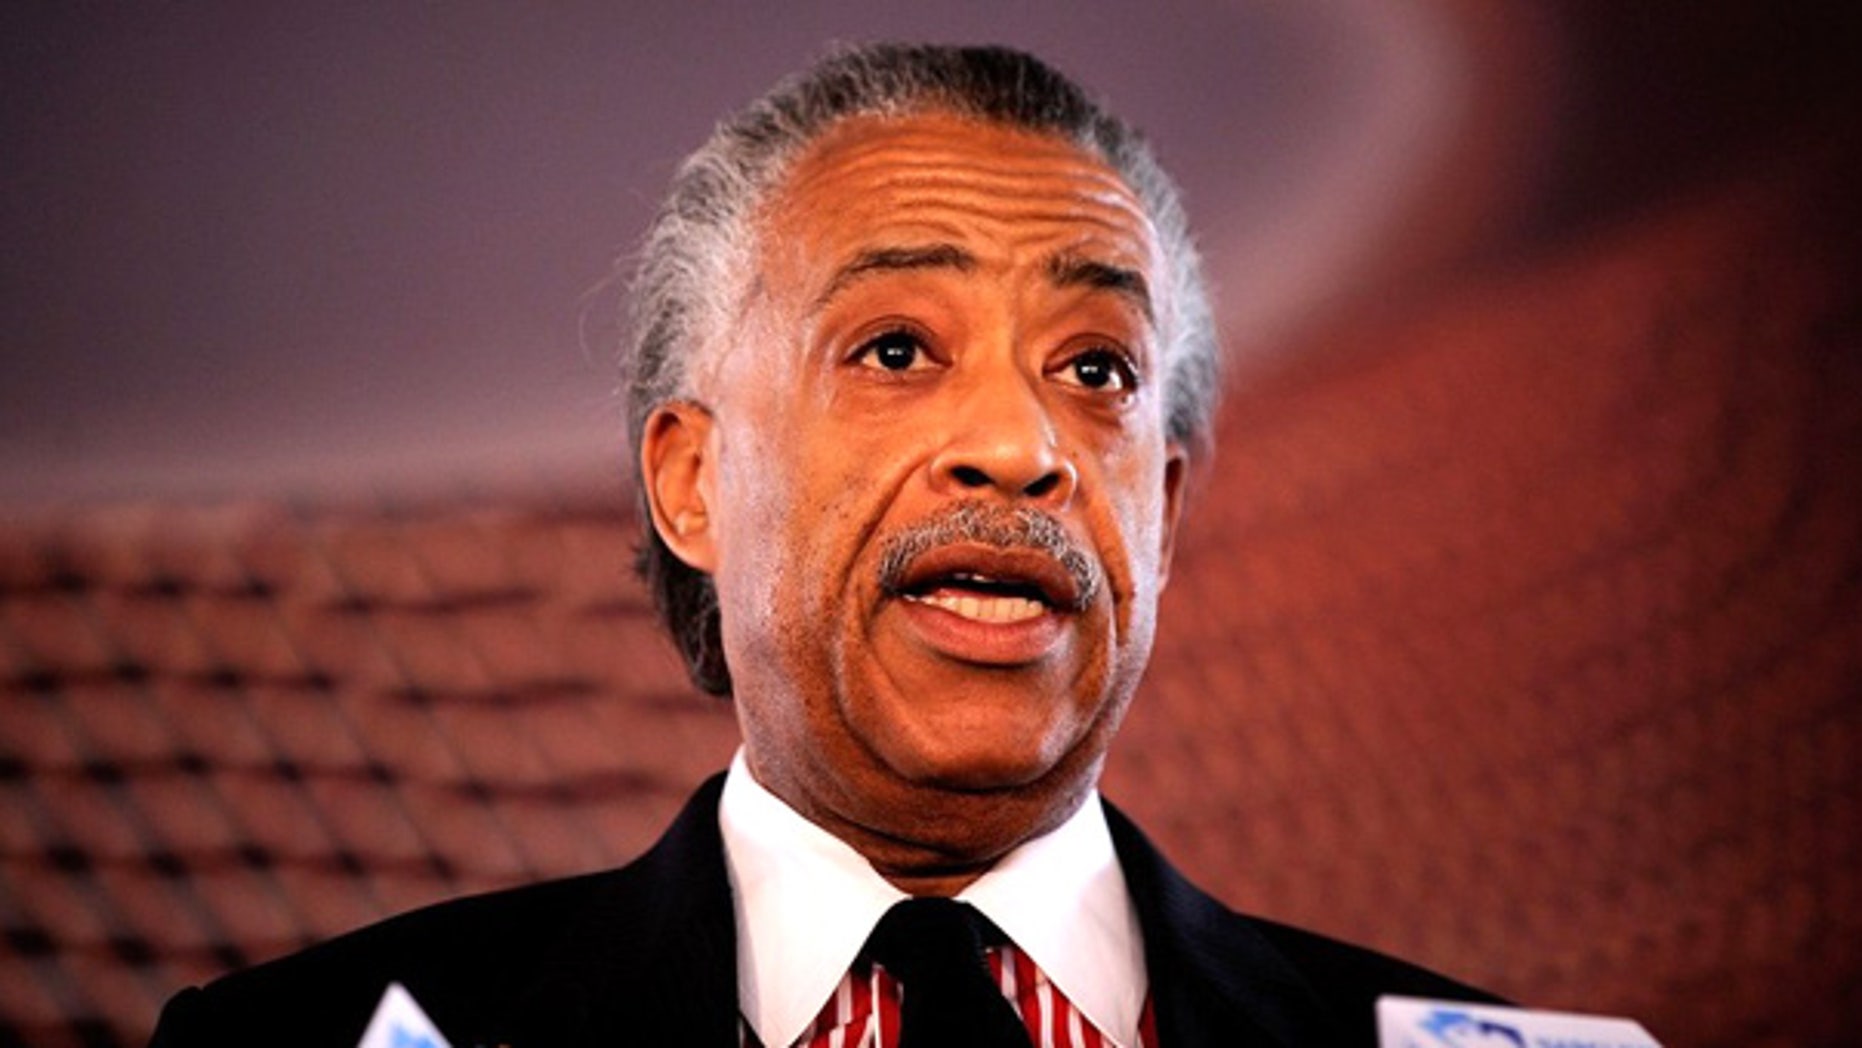 Why does Al Sharpton still have pull with America's political class